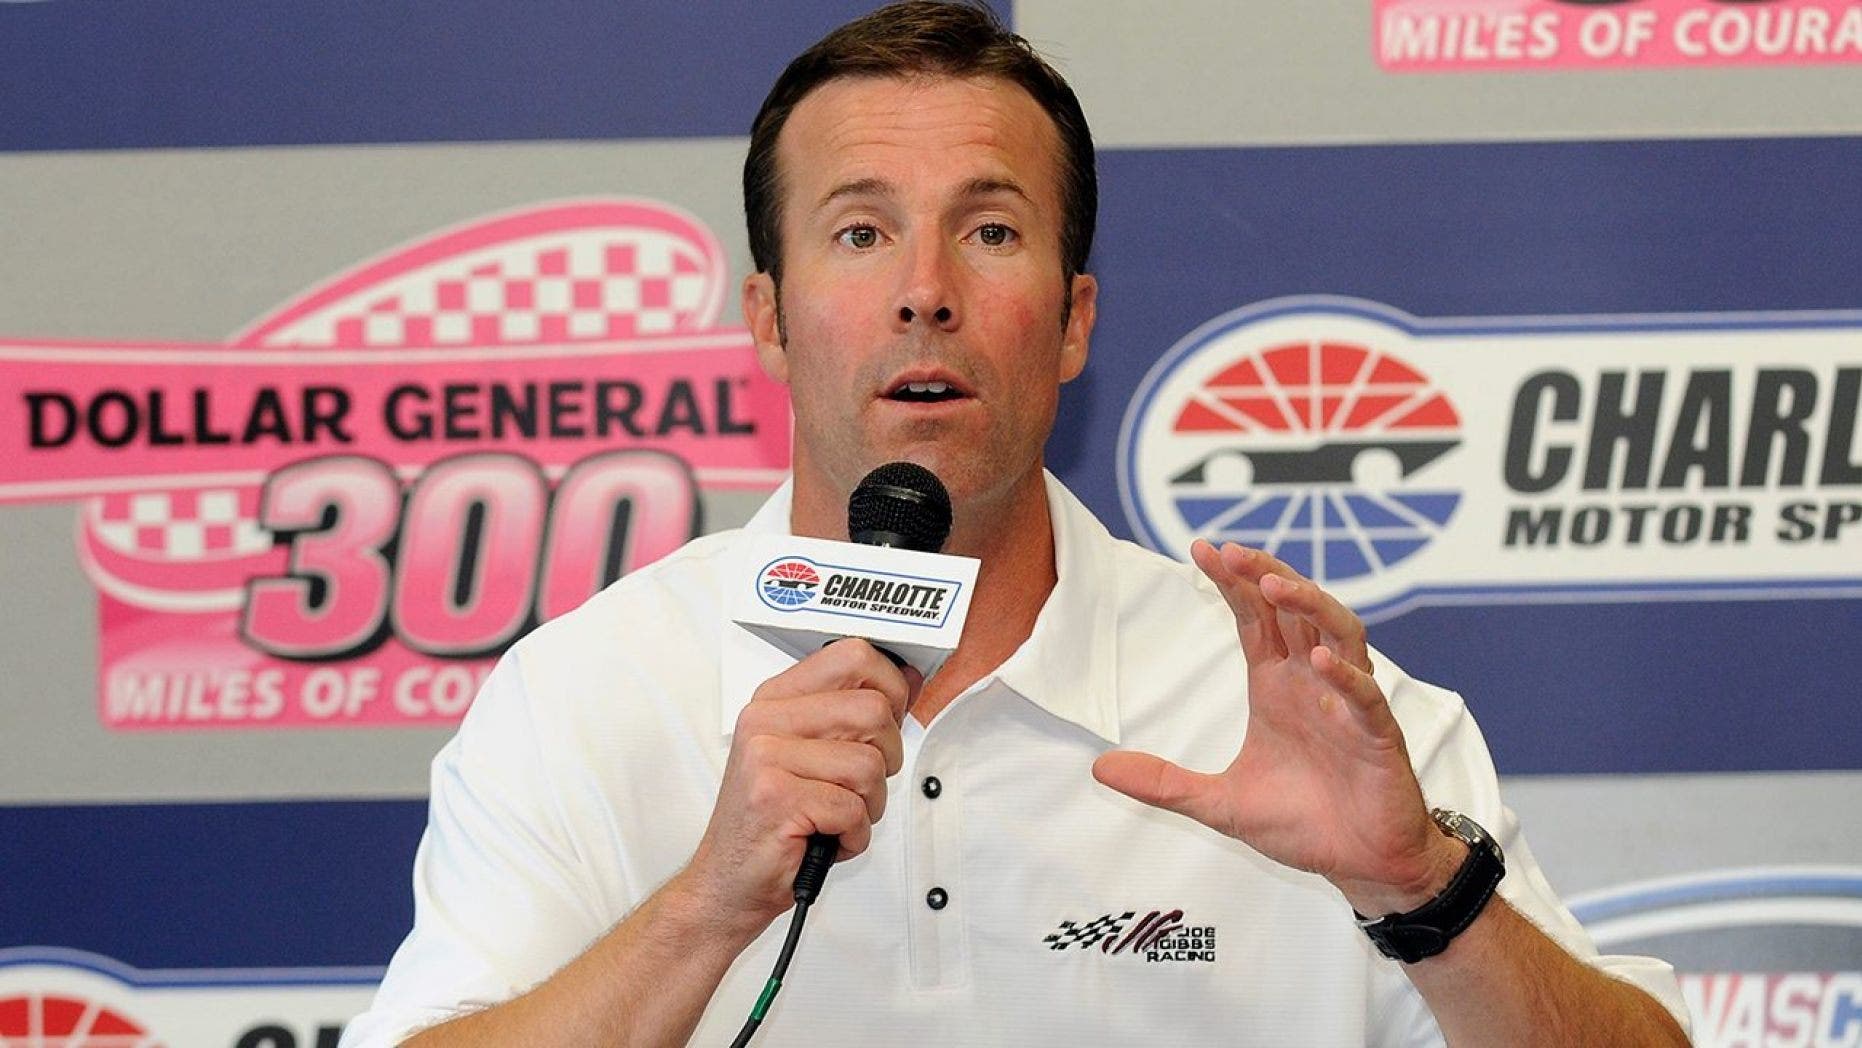 J.D. Gibbs, who died on January 11 at age 49, was president of Joe Gibbs Racing and son of former NFL head coach Joe Gibbs. He is seen speaking at a press conference in Concord, N.C., on October 14, 2011. (Associated Press)